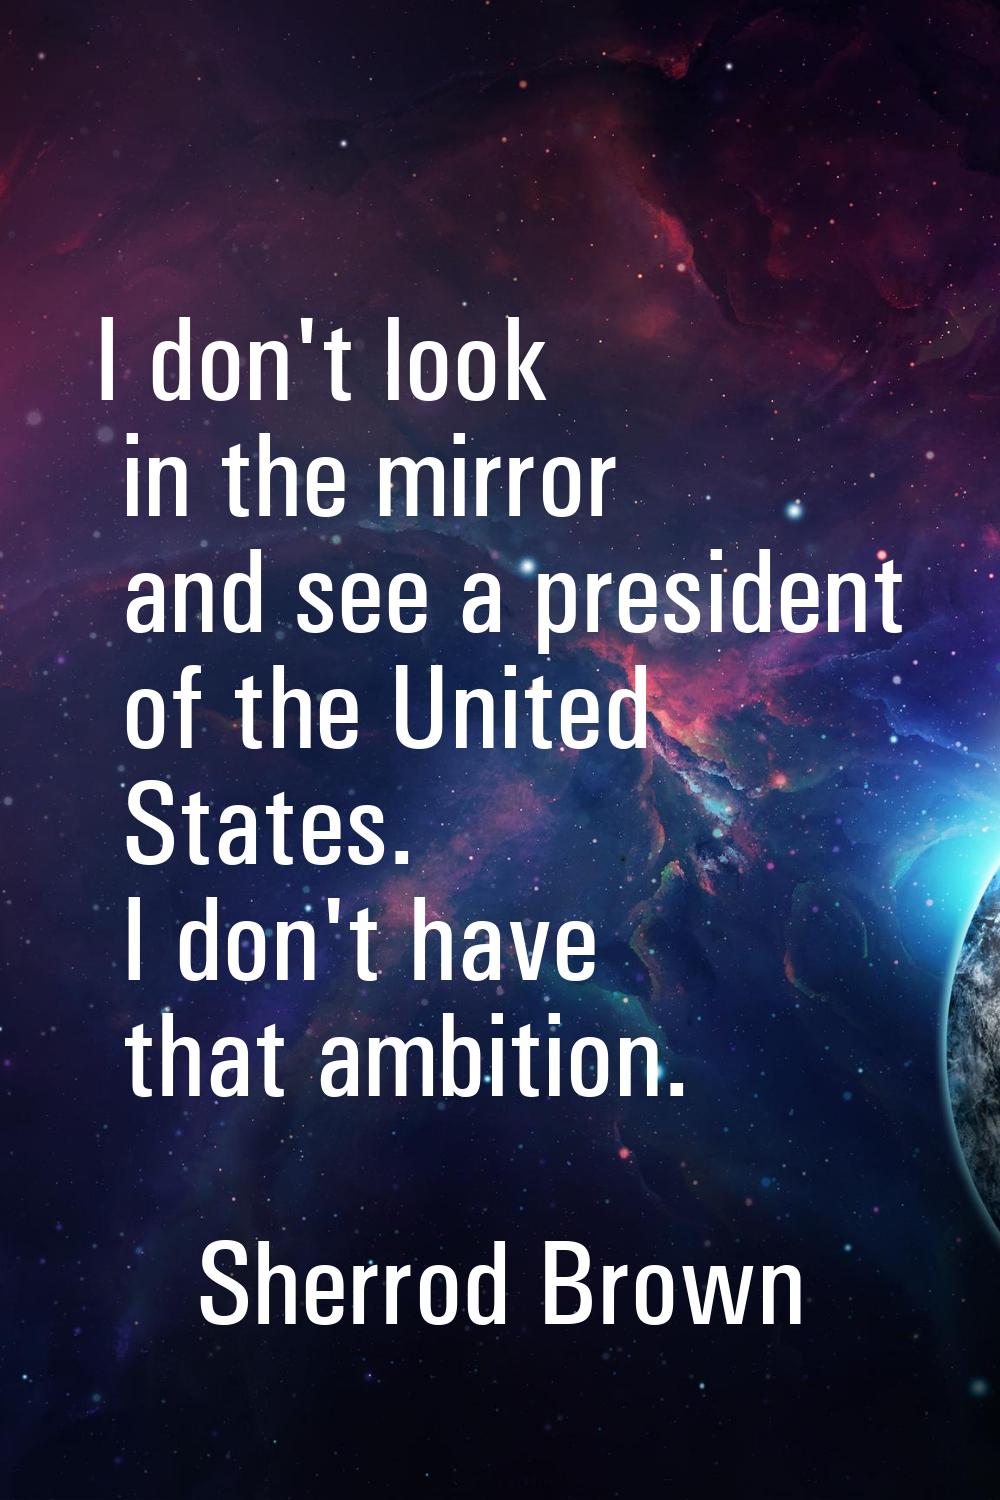 I don't look in the mirror and see a president of the United States. I don't have that ambition.